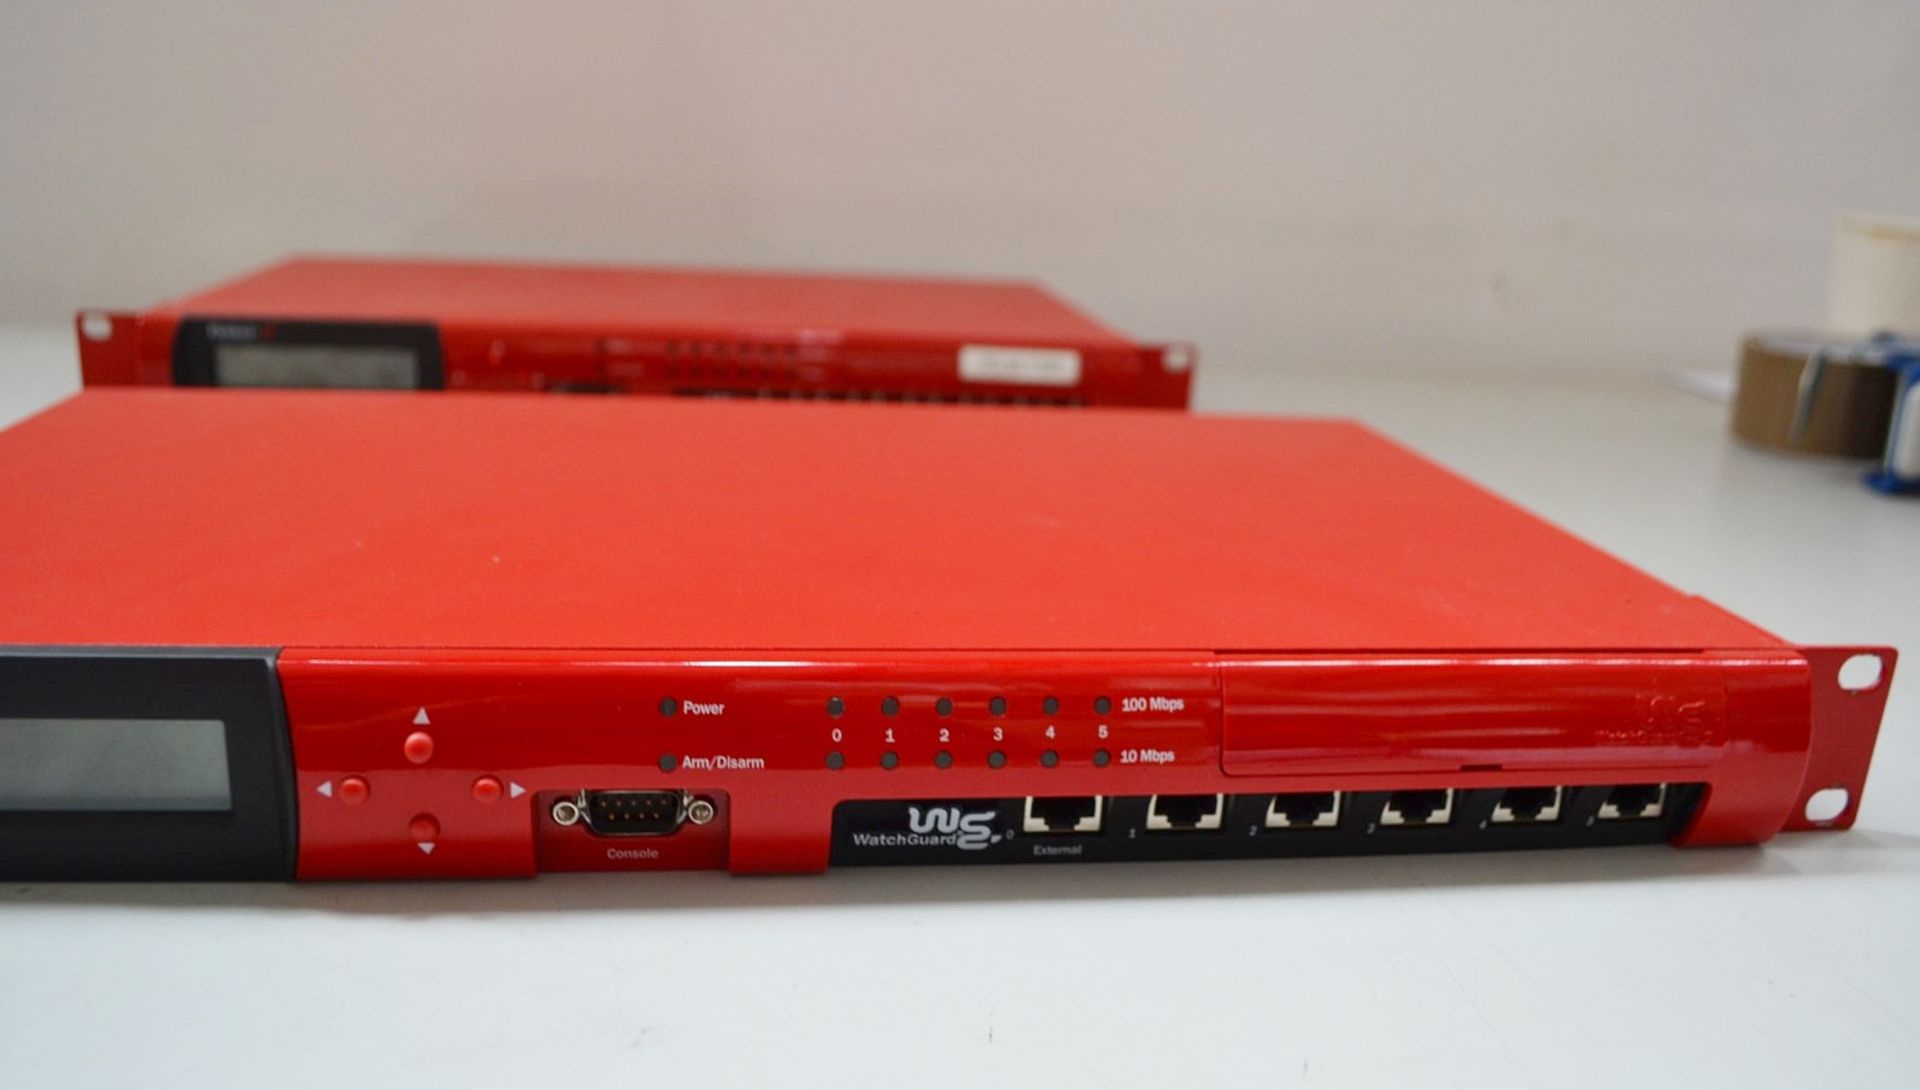 3 x Red Watchguard Firebox Security System's - Ref: LD359 - CL409 - Altrincham WA14 - Image 7 of 13